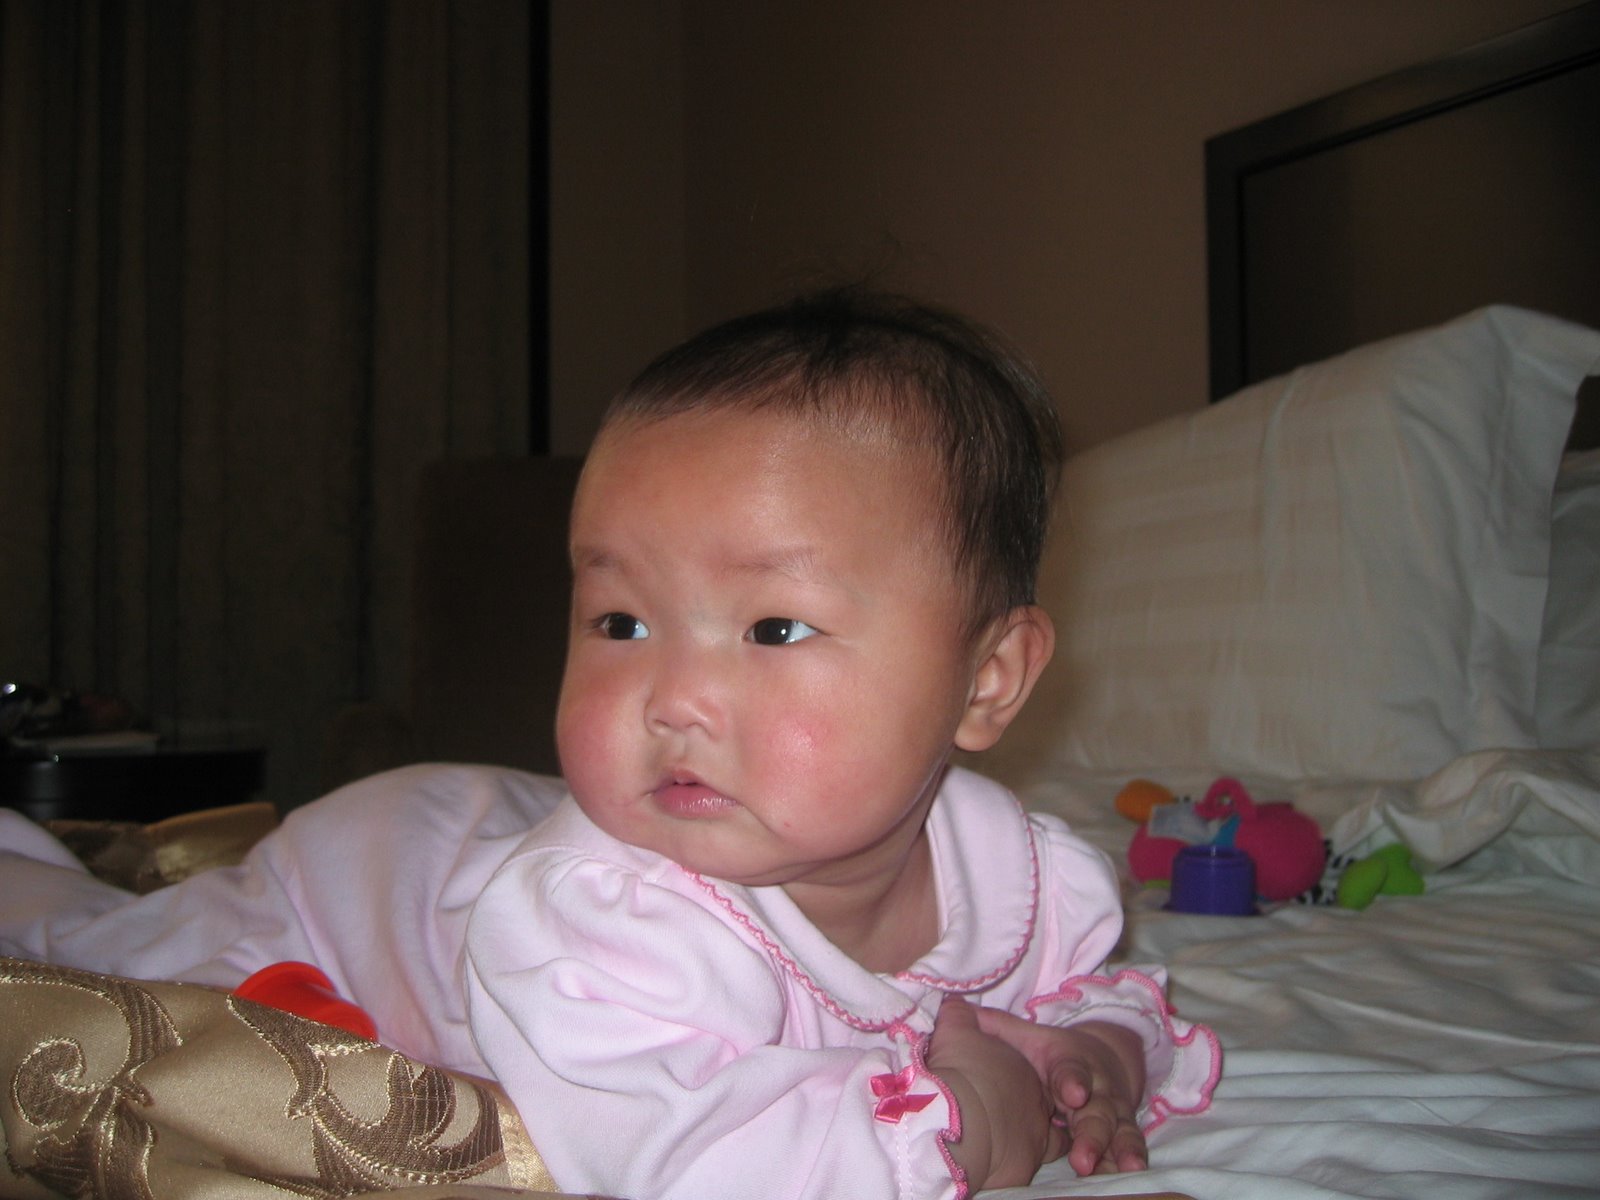 [Mylia+playing+on+the+bed+012.JPG]